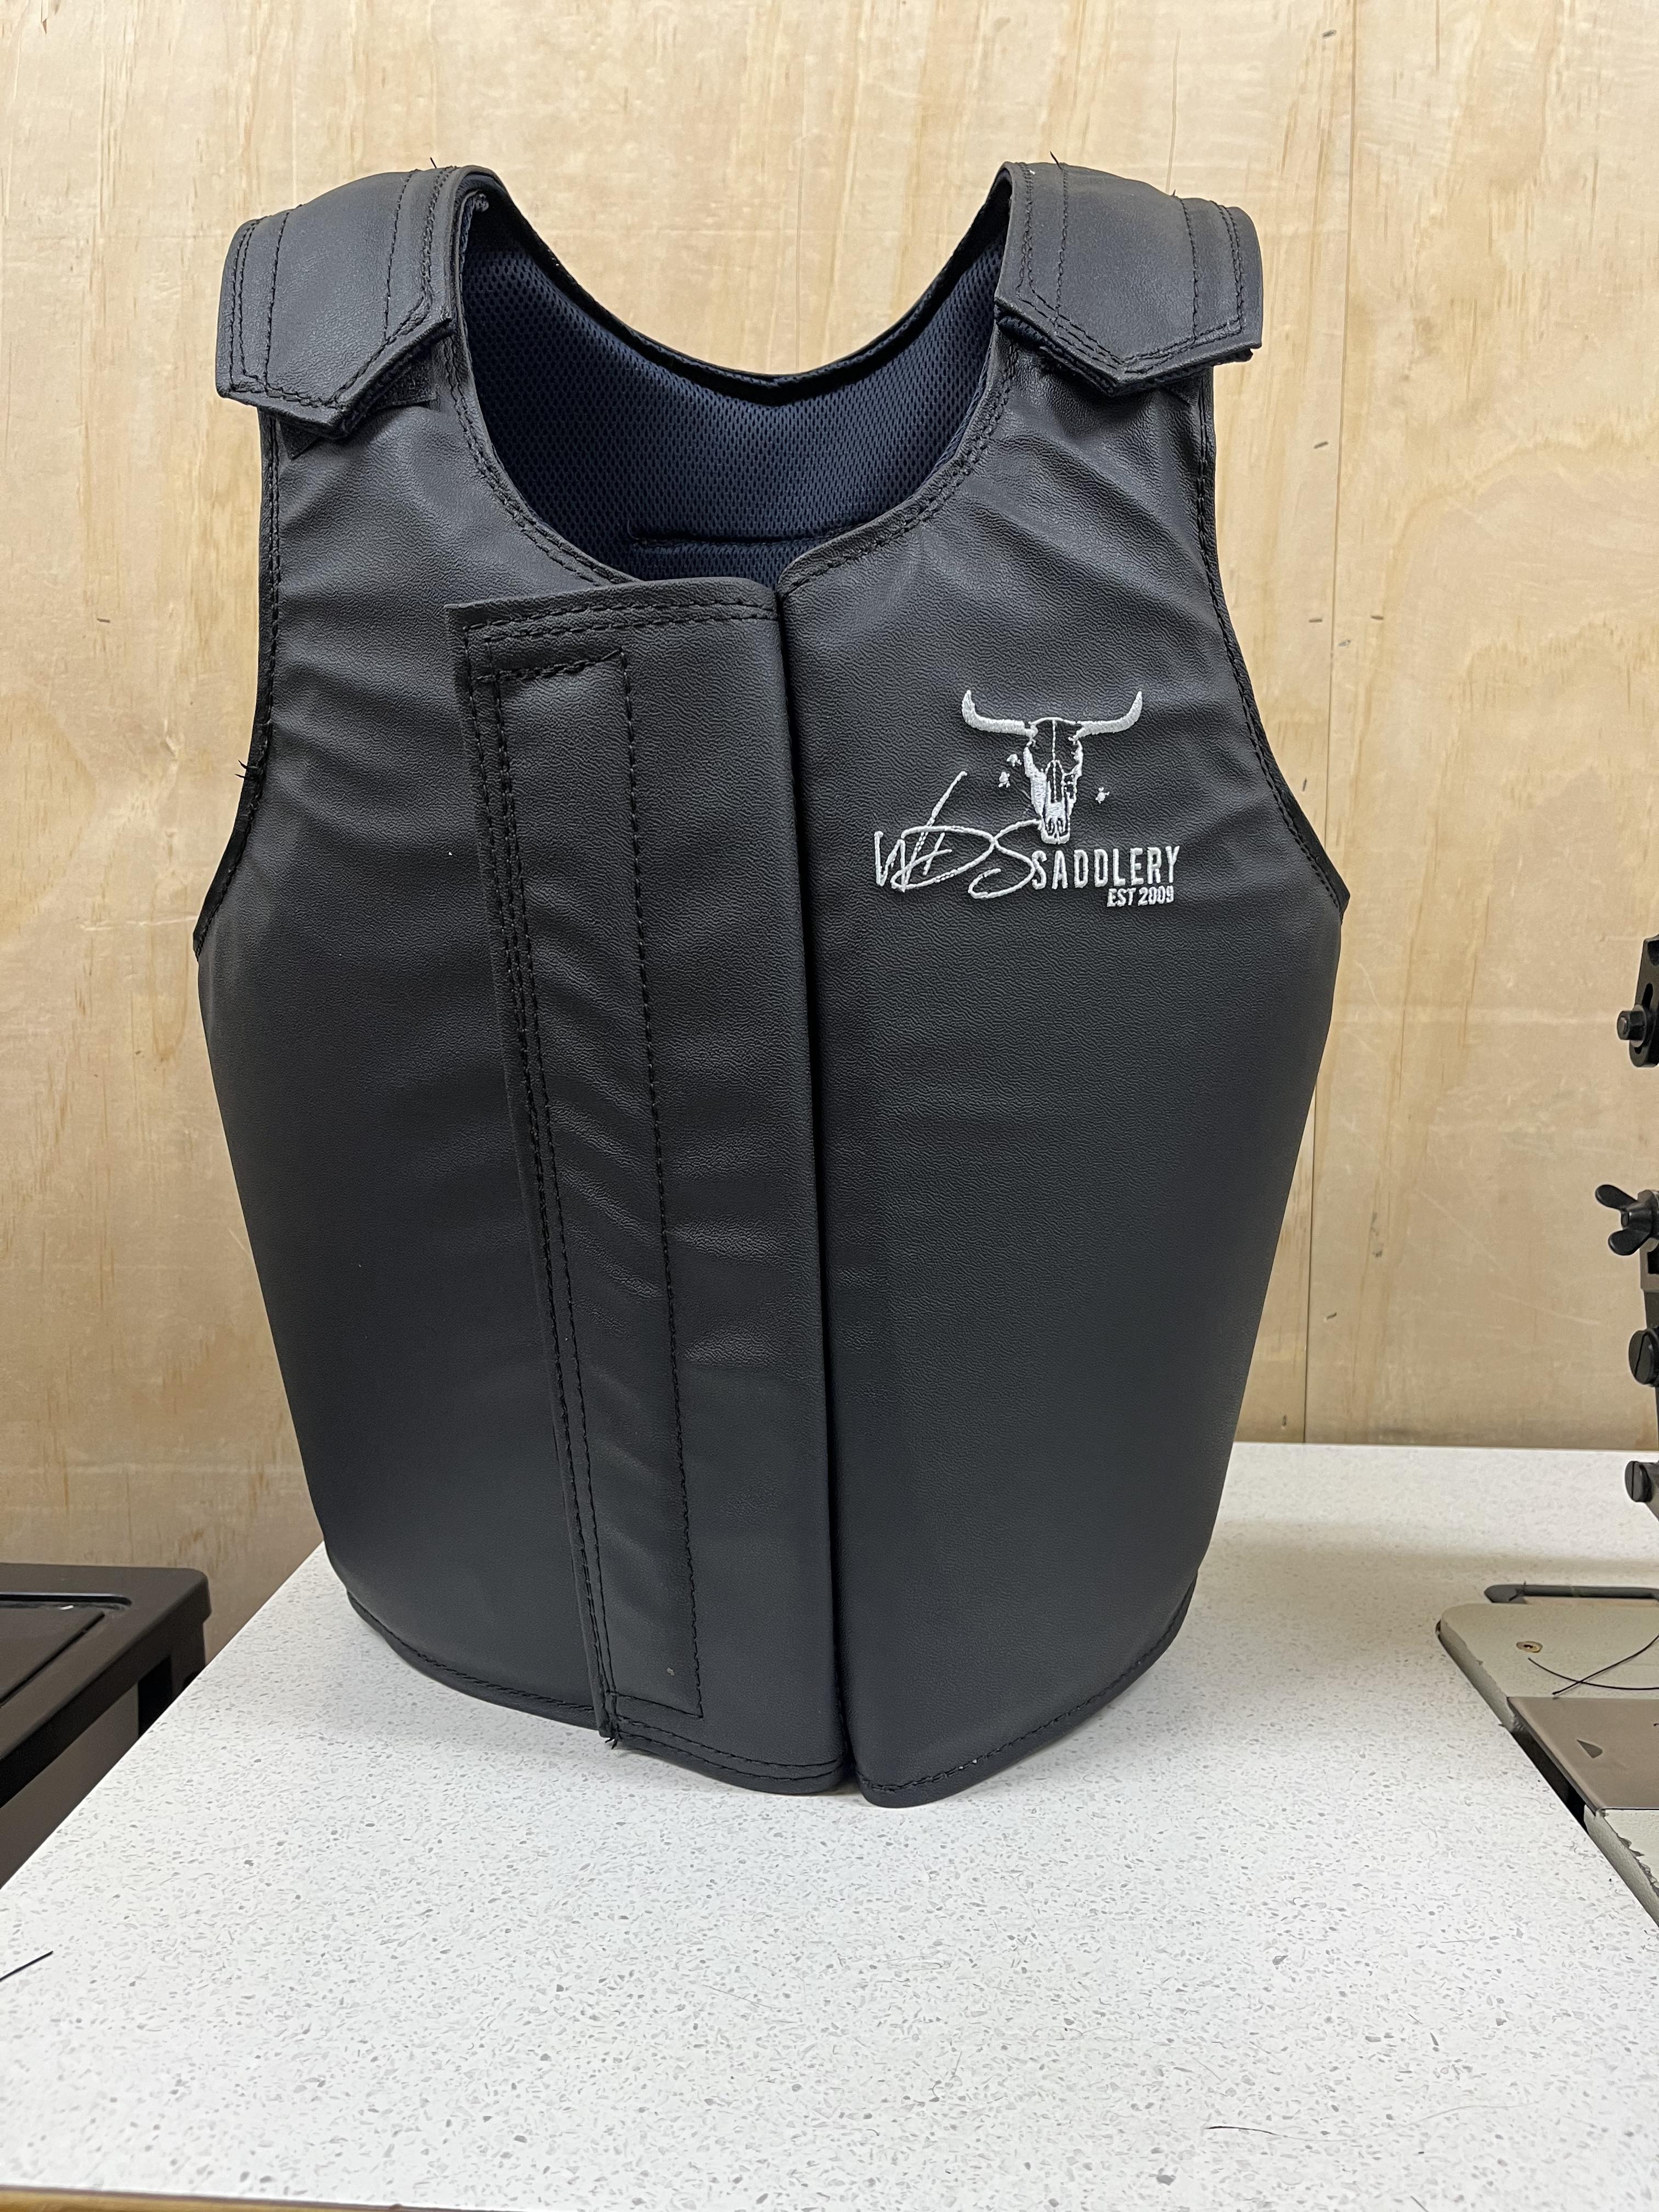 WDS Saddlery Pro Rodeo Vest - Silver Adult Small - Ready made to be shipped